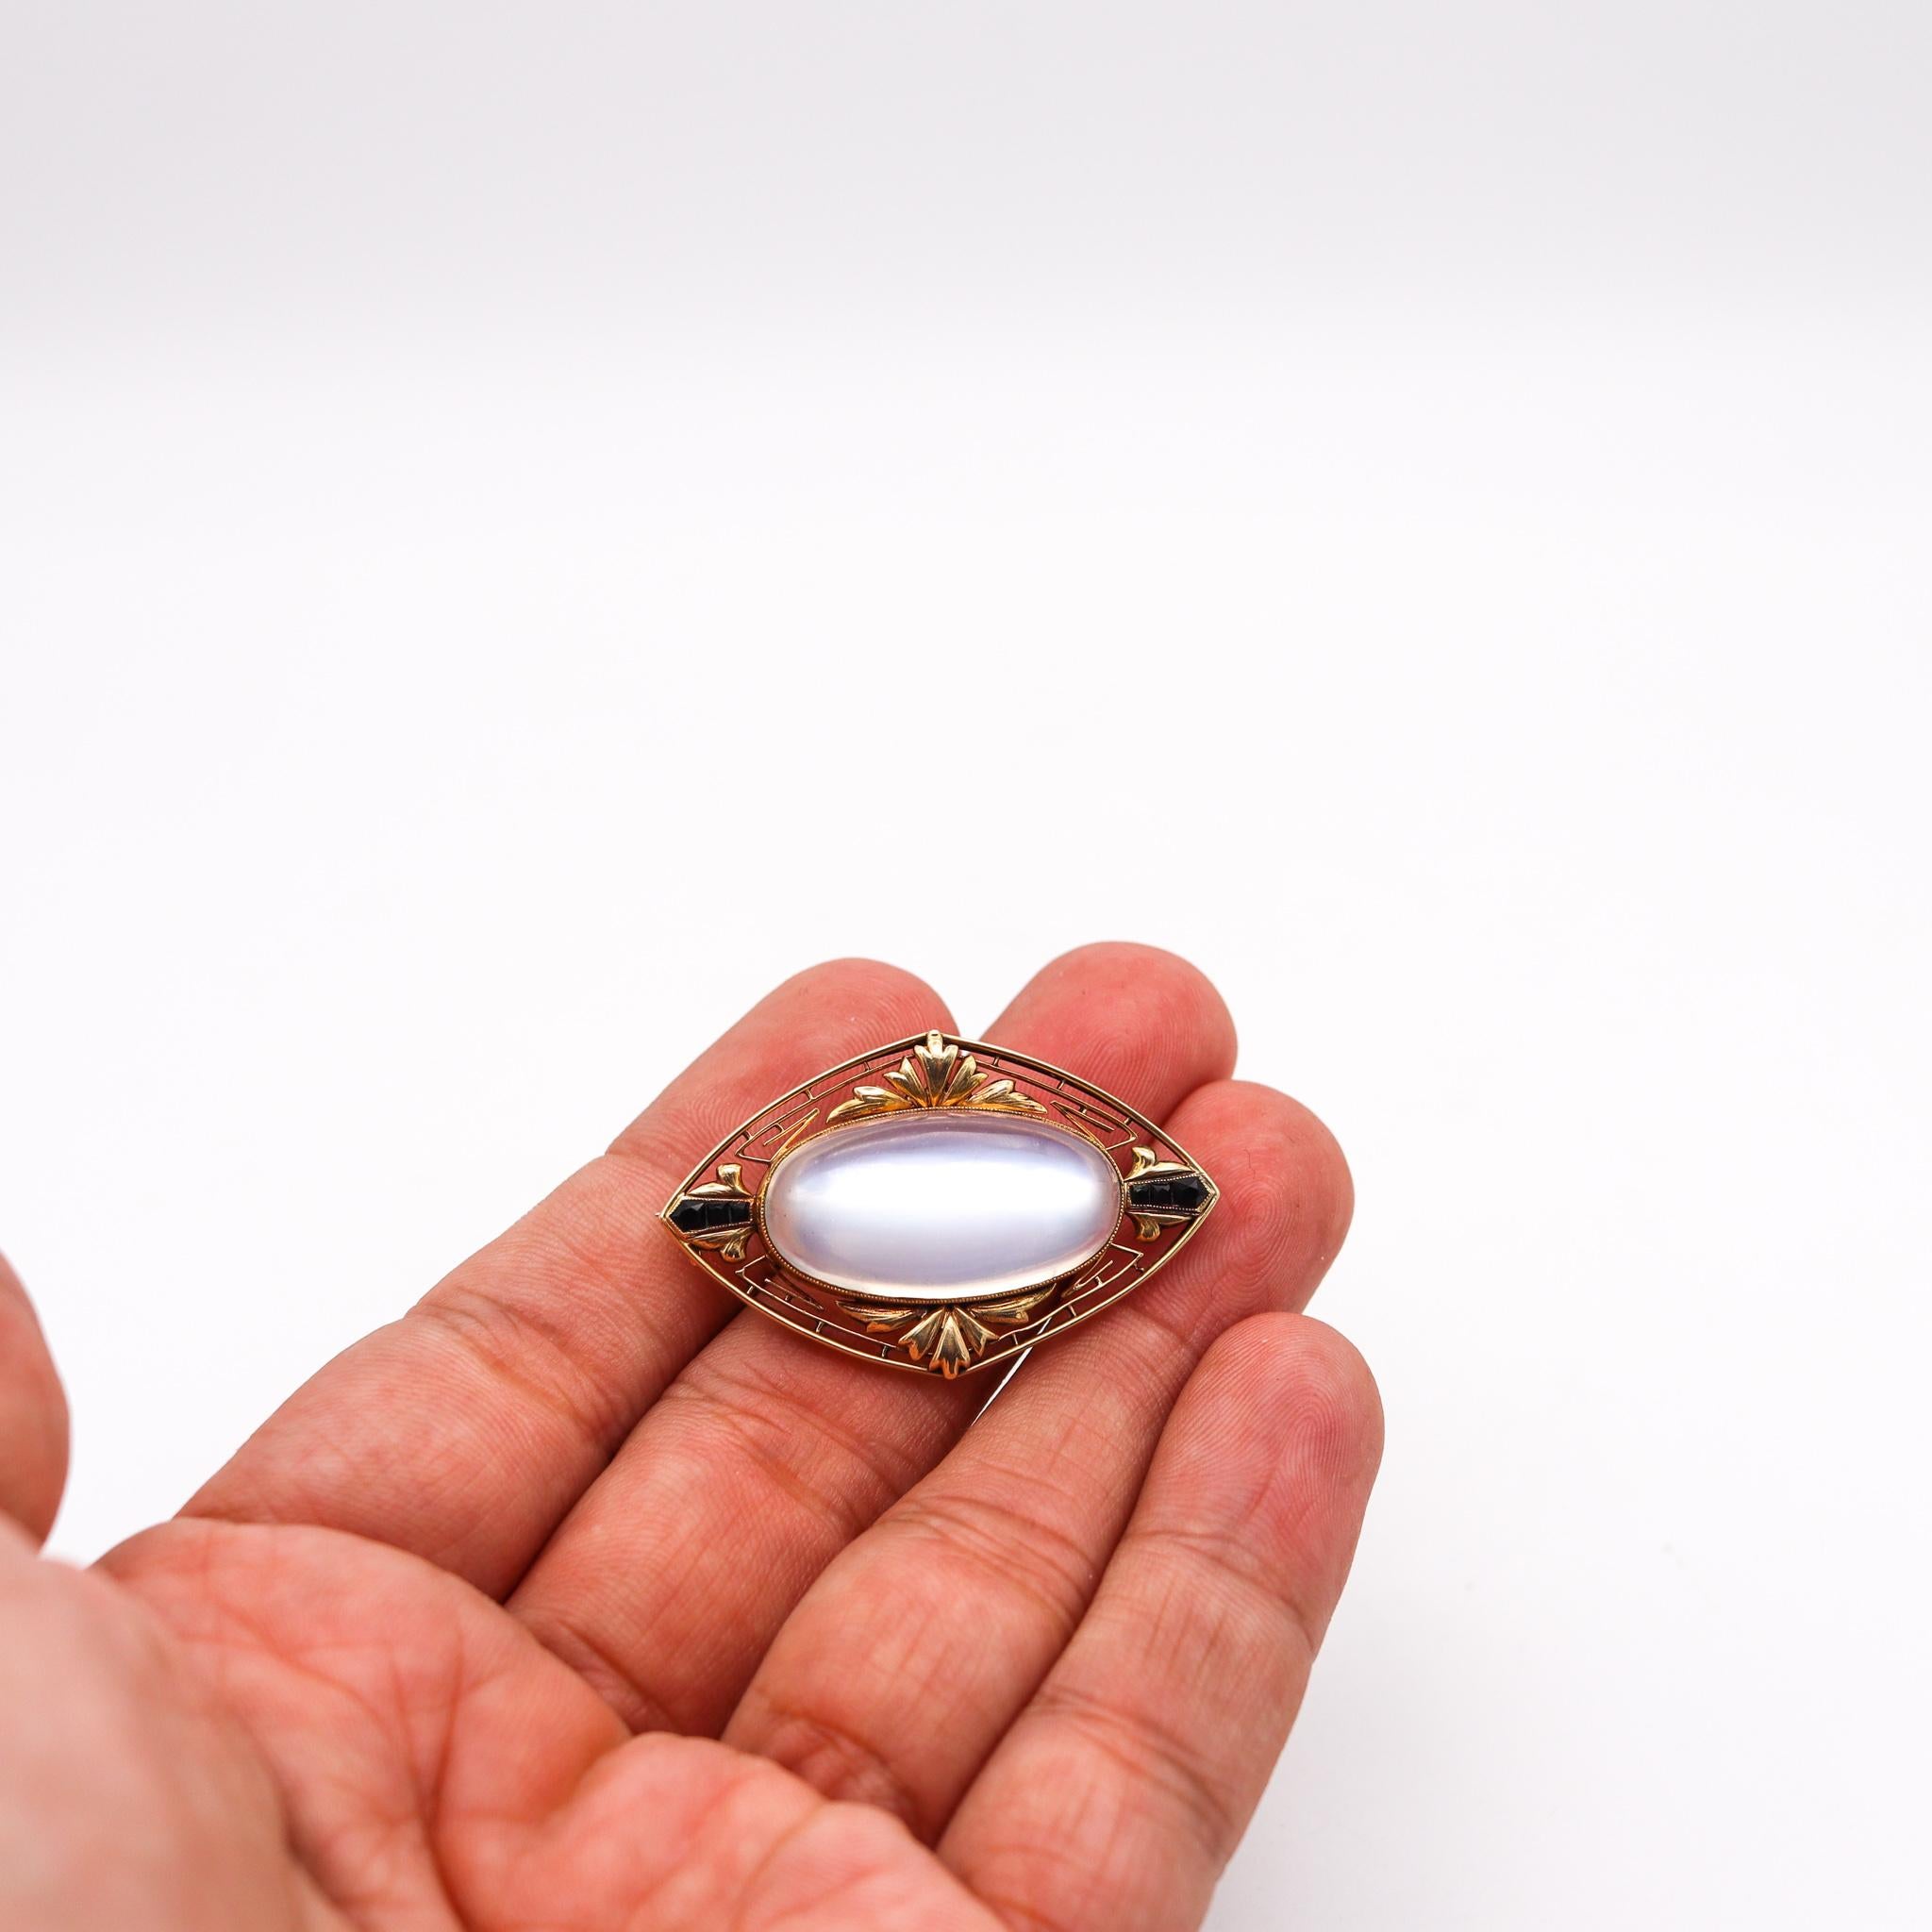 Art Deco 1920 Antique Pendant Brooch 18kt Gold with 29.58 Ctw Moonstone & Onyx 2